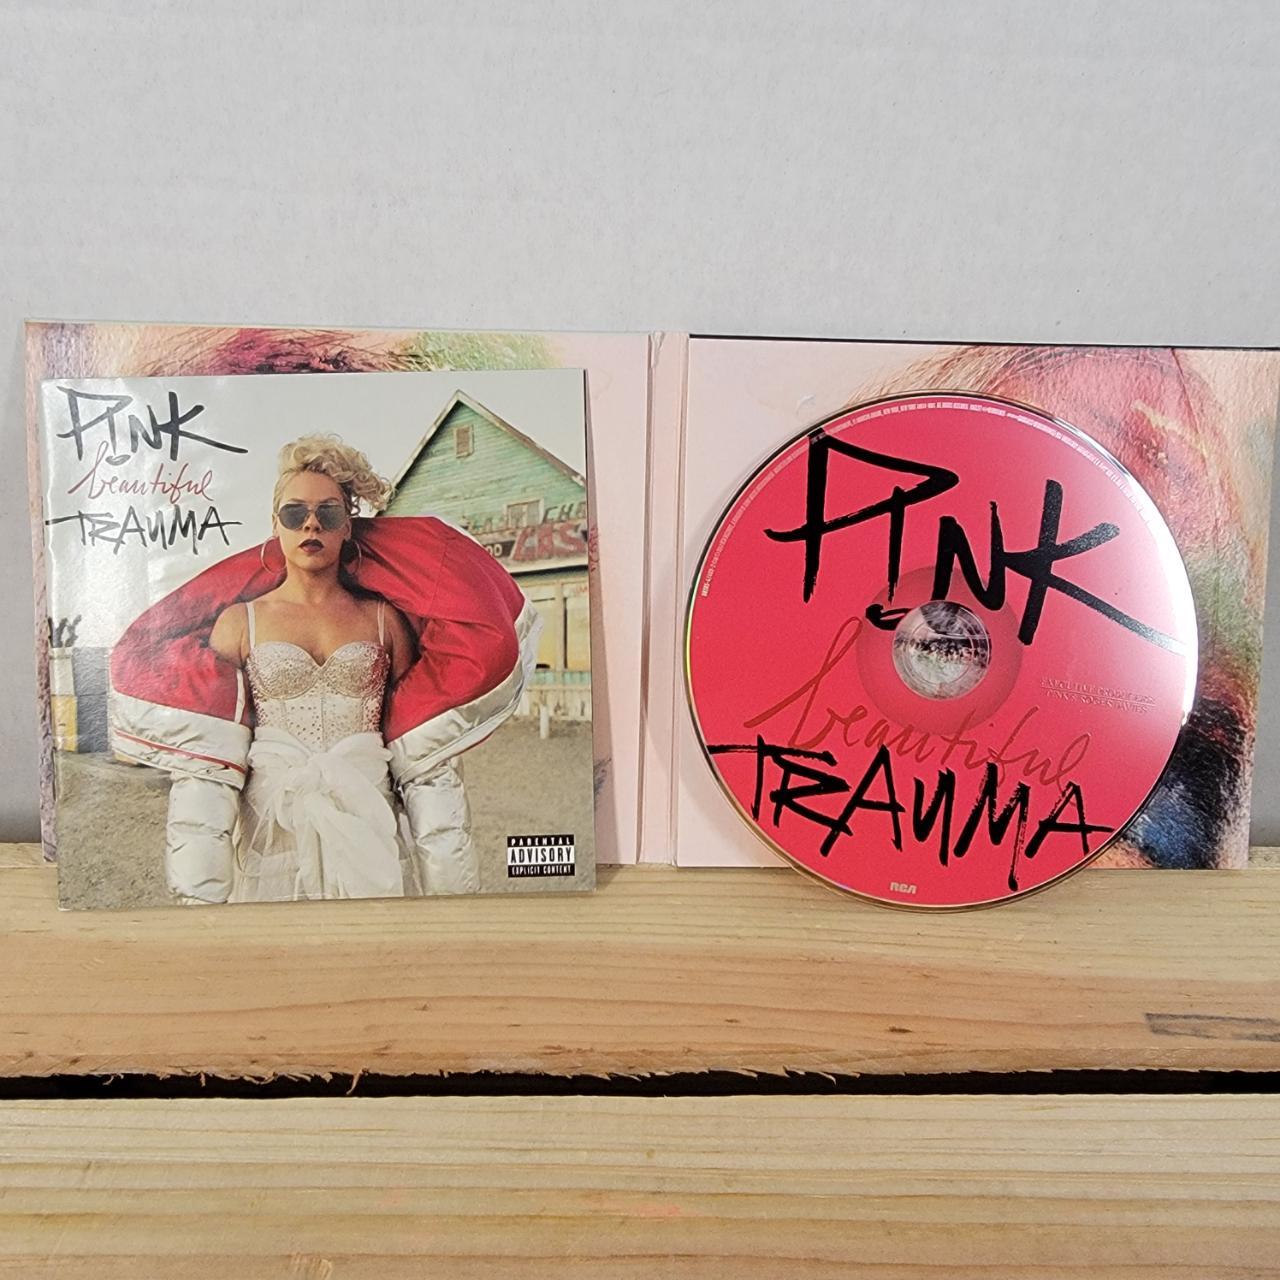 CD Pink Beautiful Trauma. The booklet has been damp